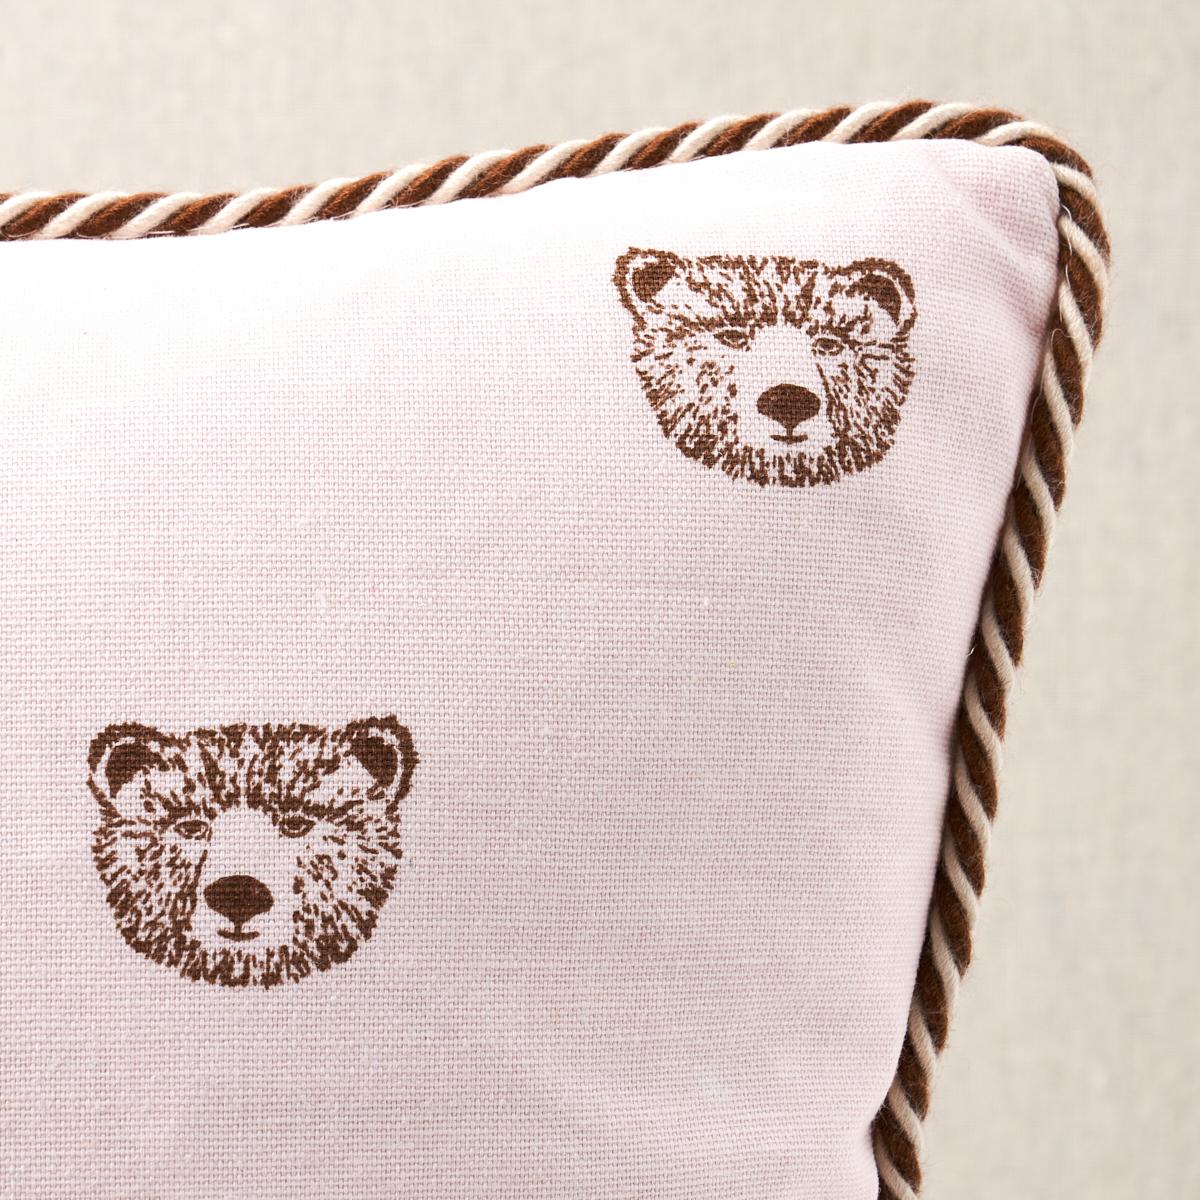 This pillow features Bear High Performance Print by Marie-Chantal of Greece for Schumacher. Marie-Chantal’s Bear High Performance Print in blush is a small-scale ursine pattern on a cotton-linen ground. Pillow is finished with a welt in Capri